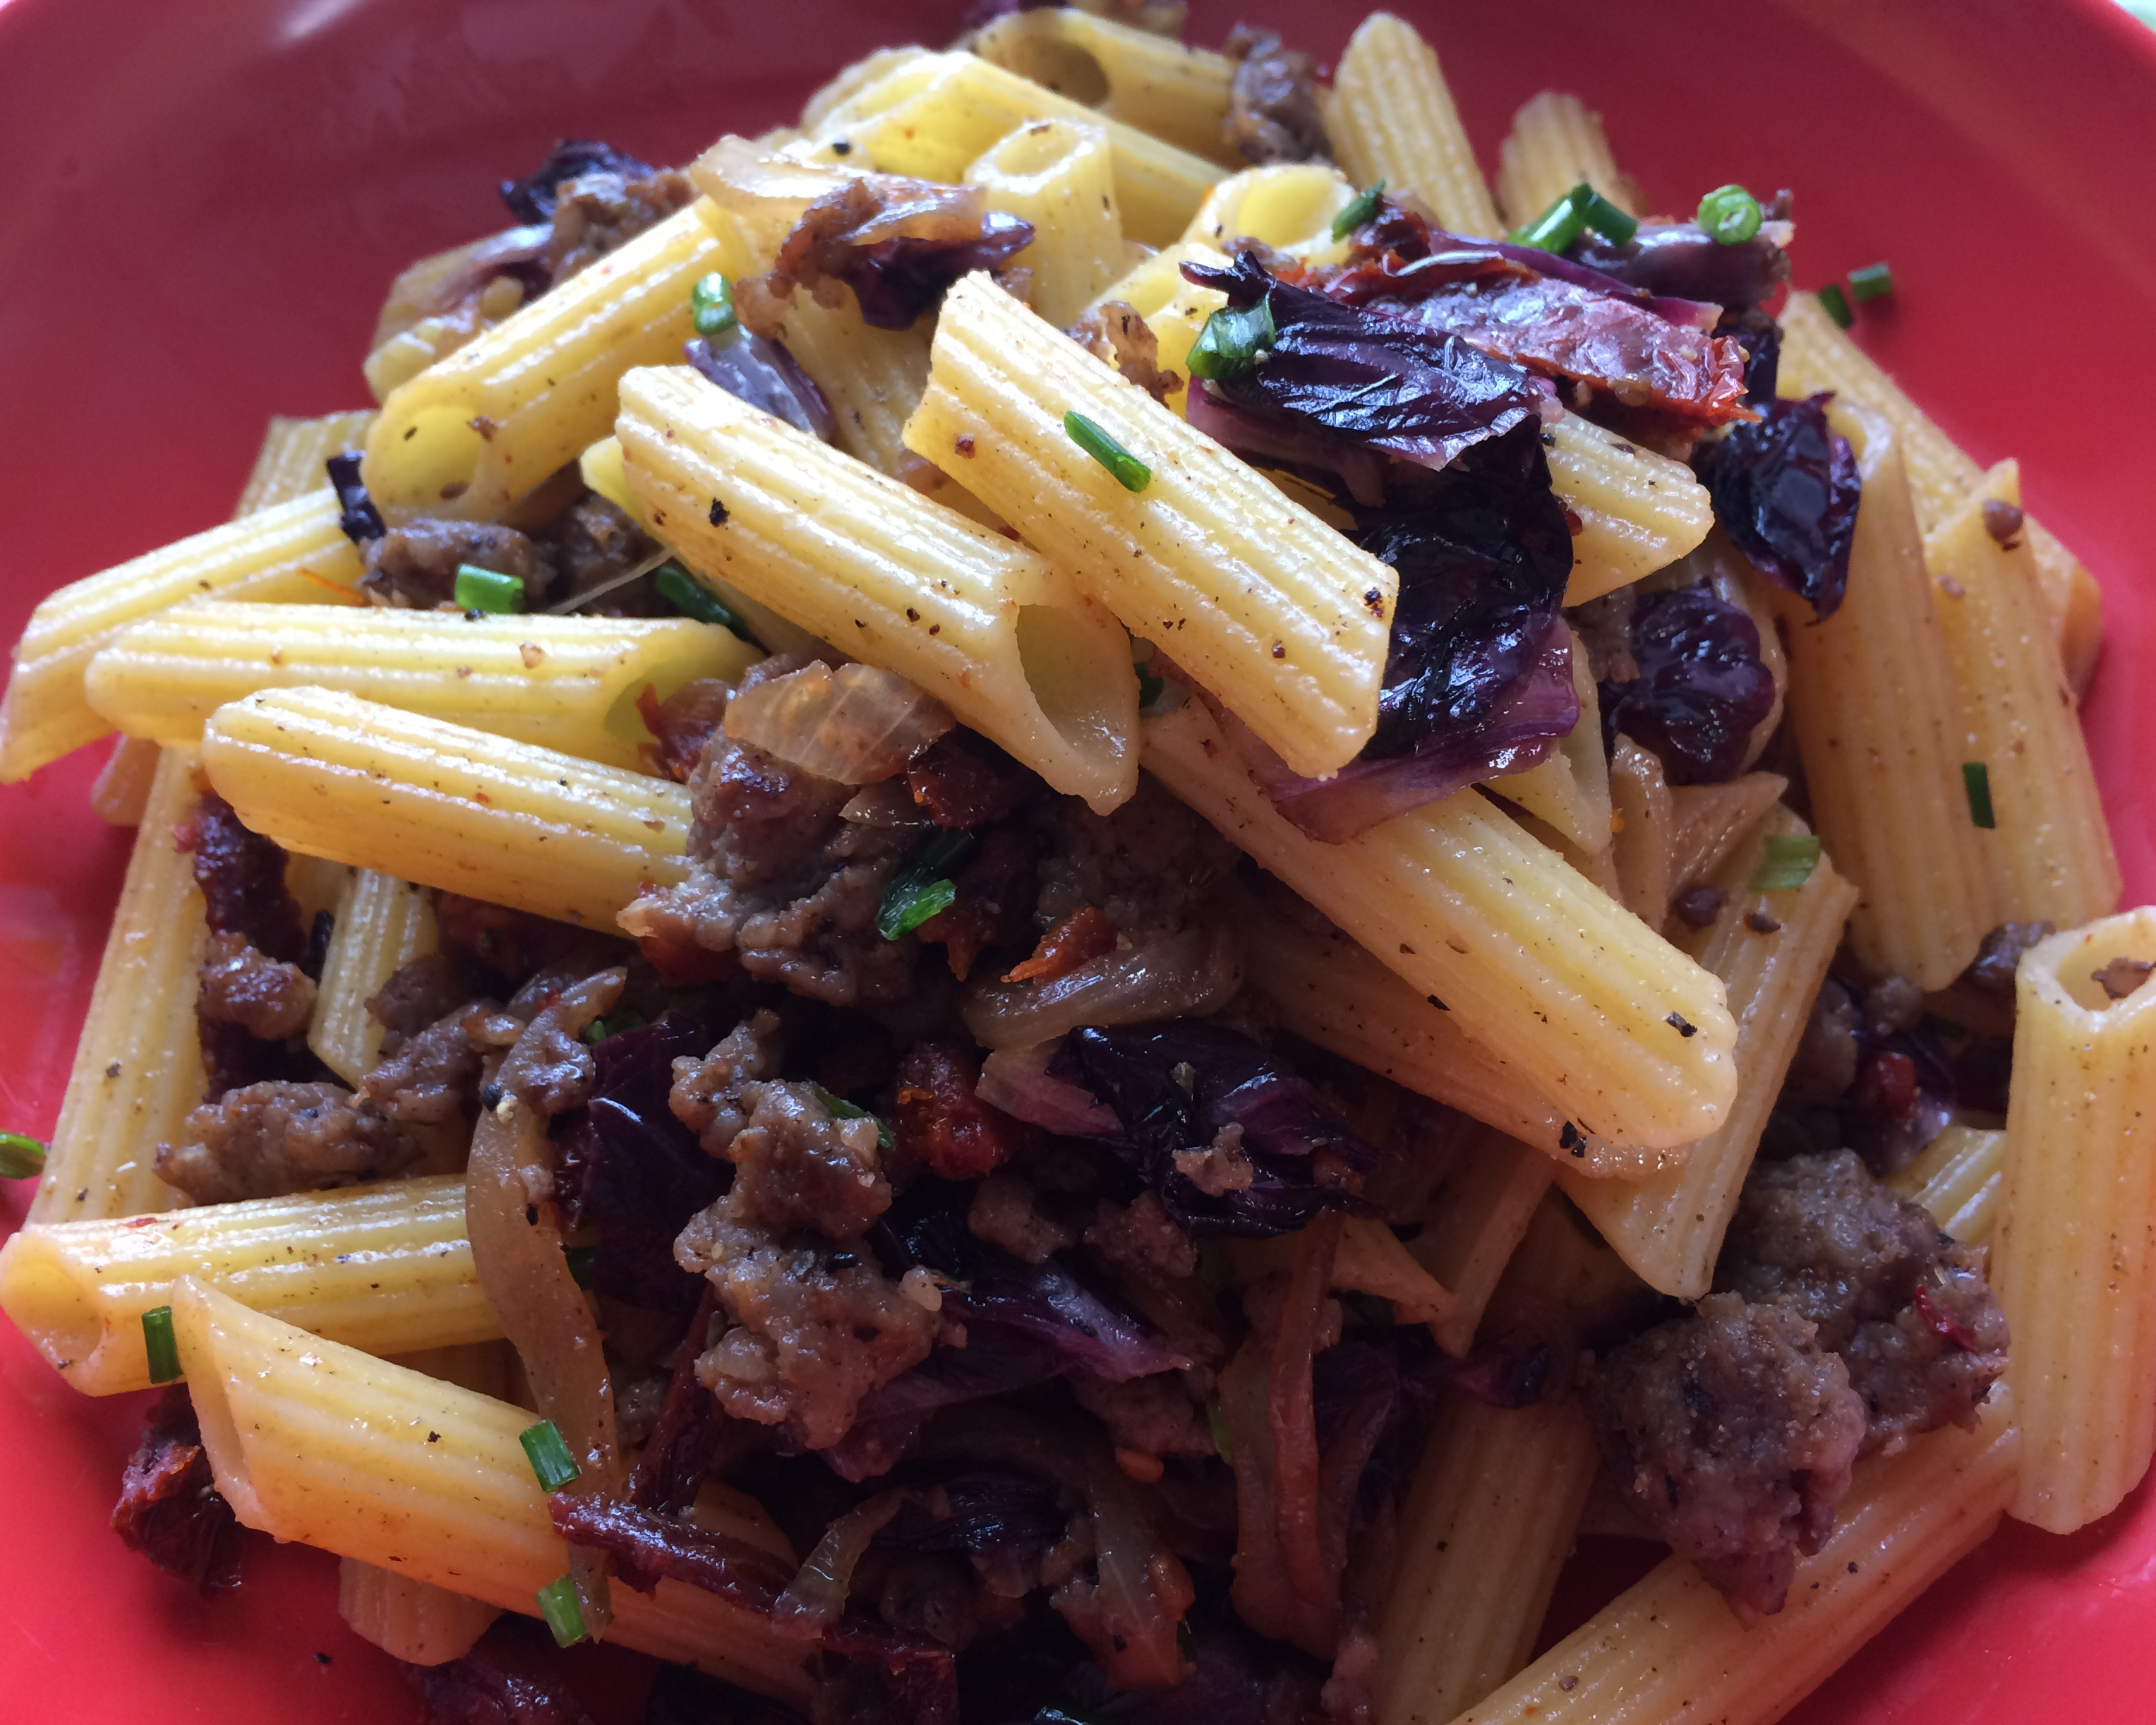 Gluten-free penne with Italian sausage, caramelized onions and radicchio